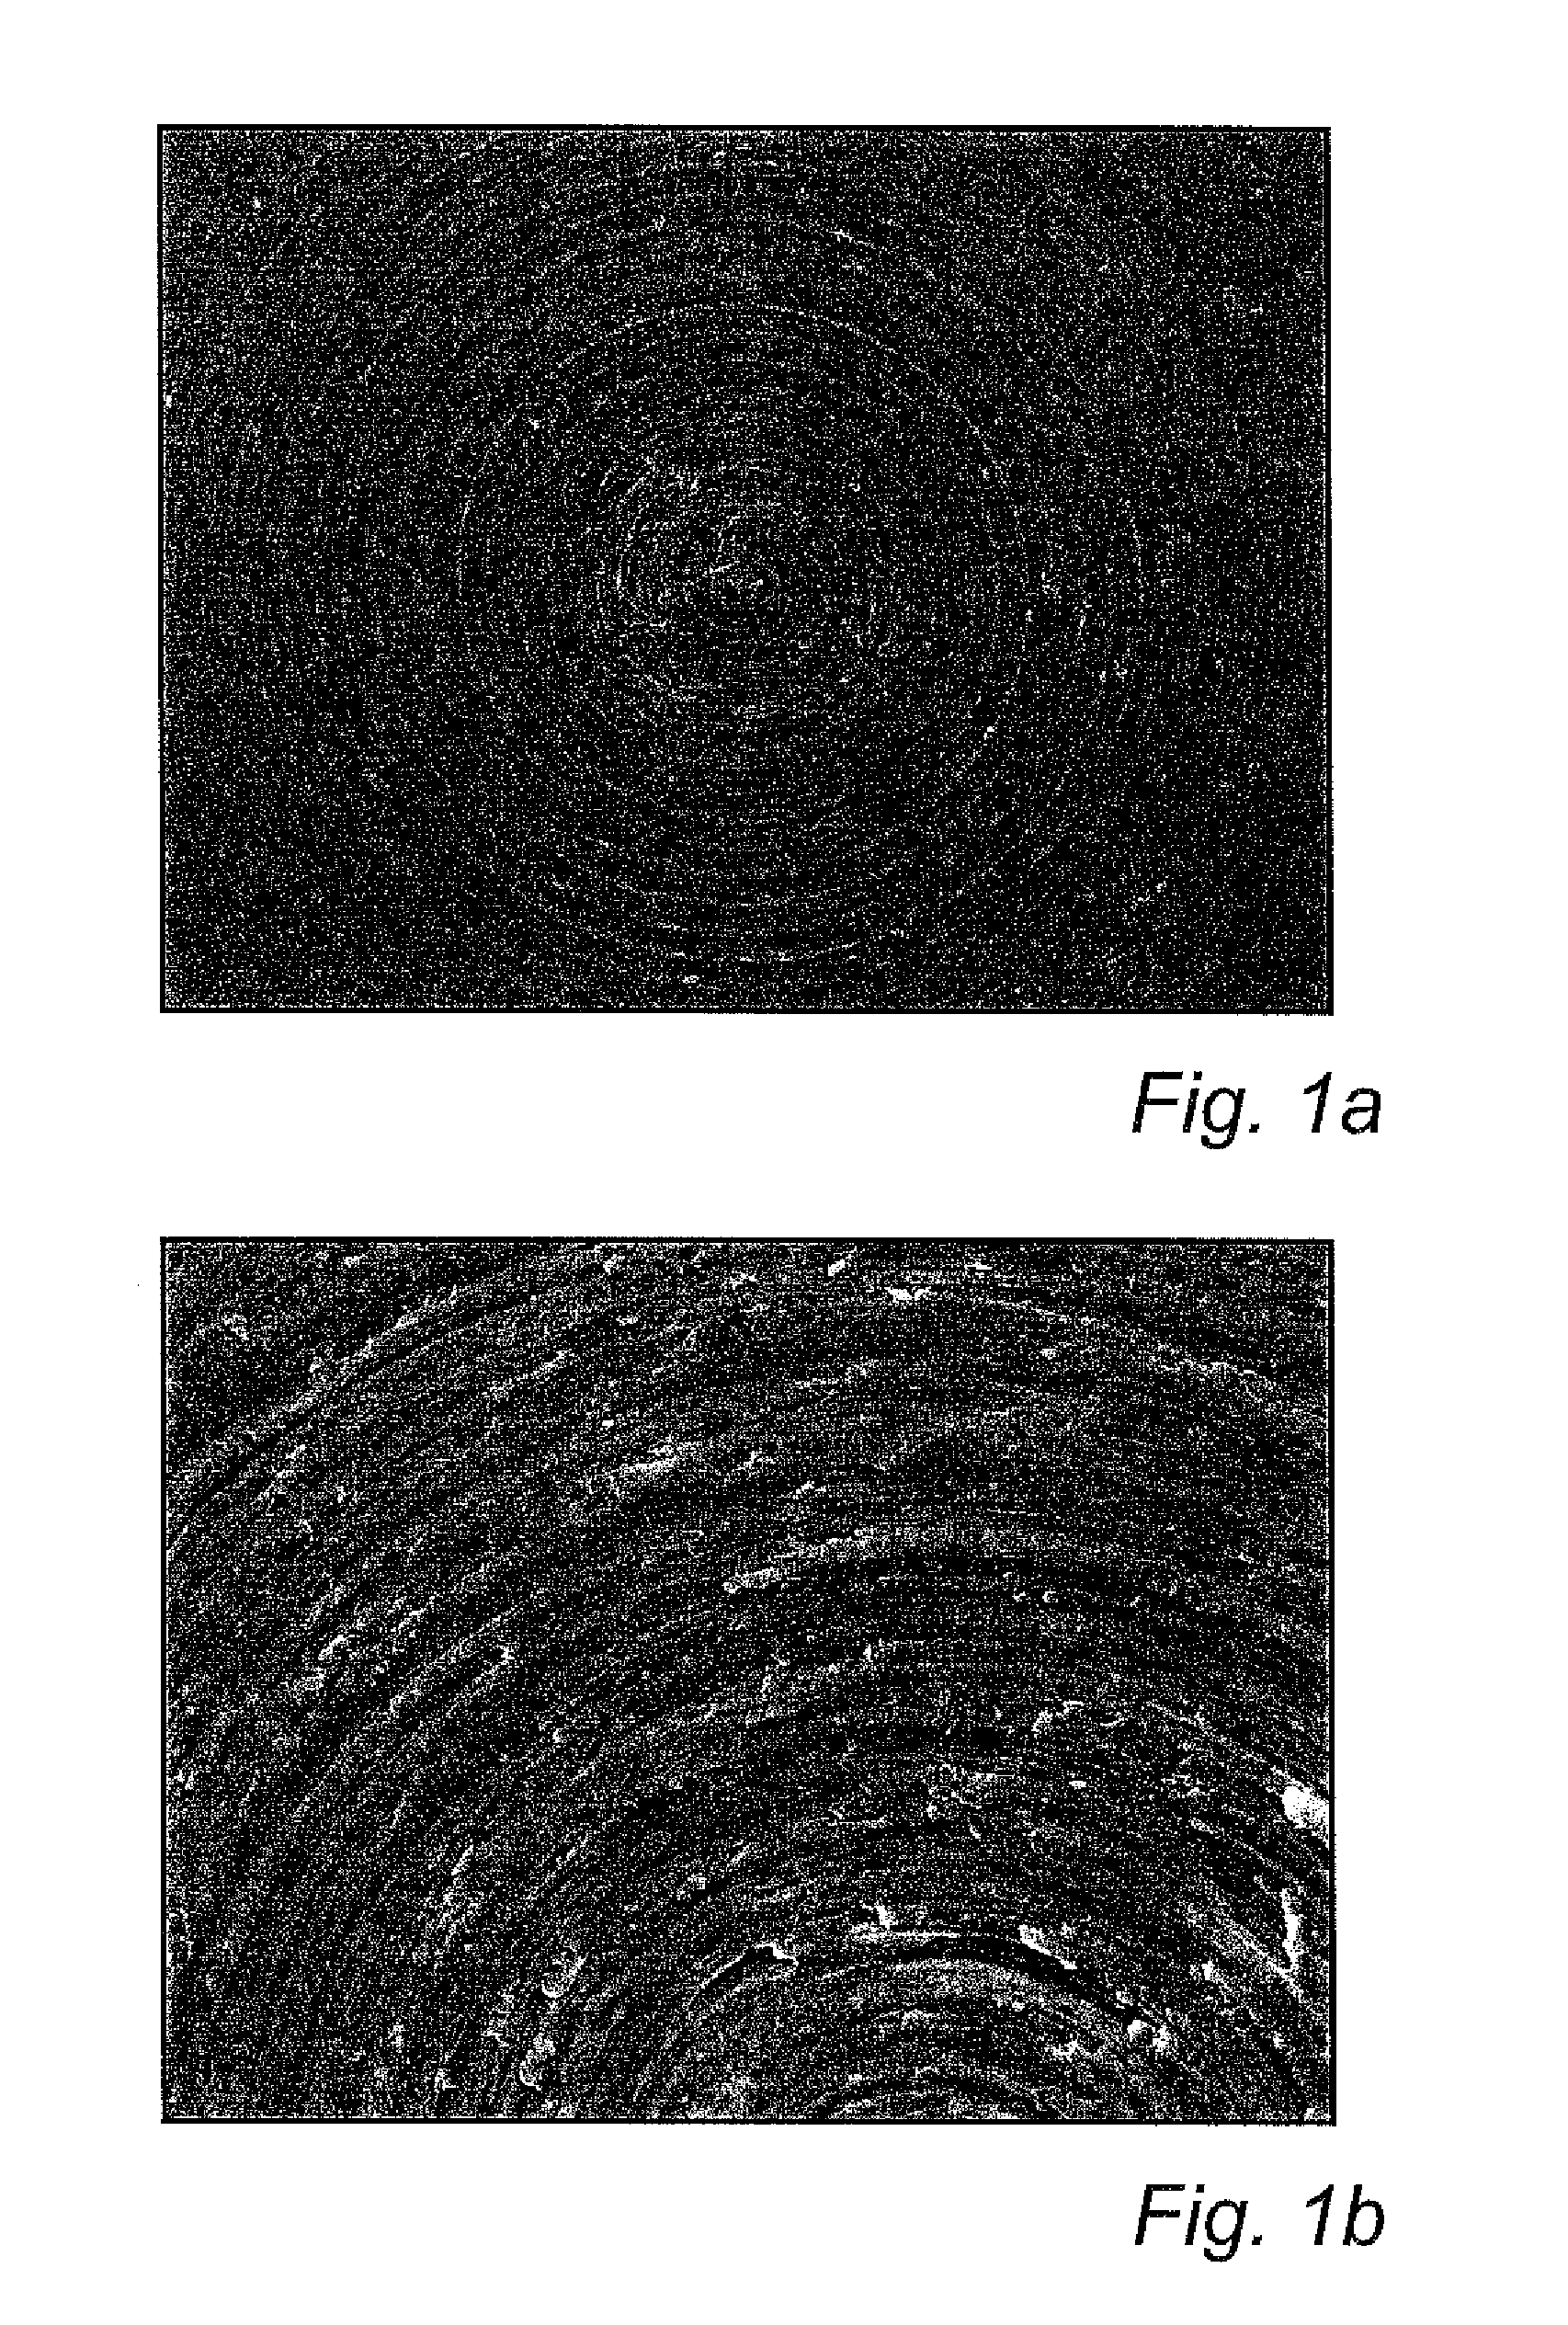 Medical device having a surface comprising nanoparticles